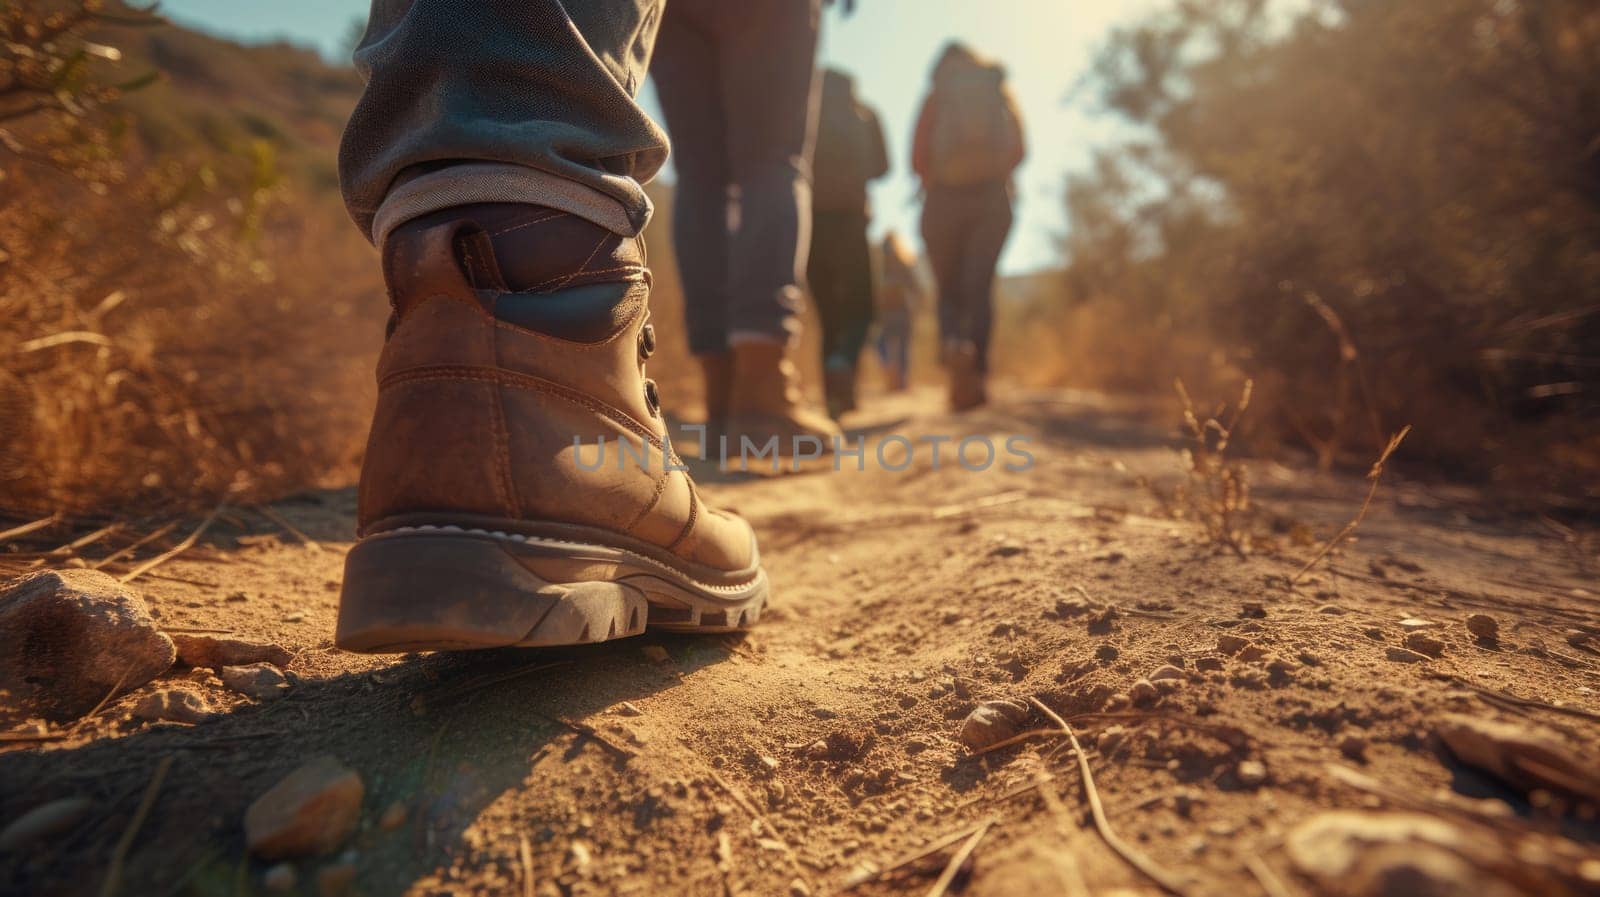 A person wearing hiking boots is walking down a path in the woods AIG41 by biancoblue